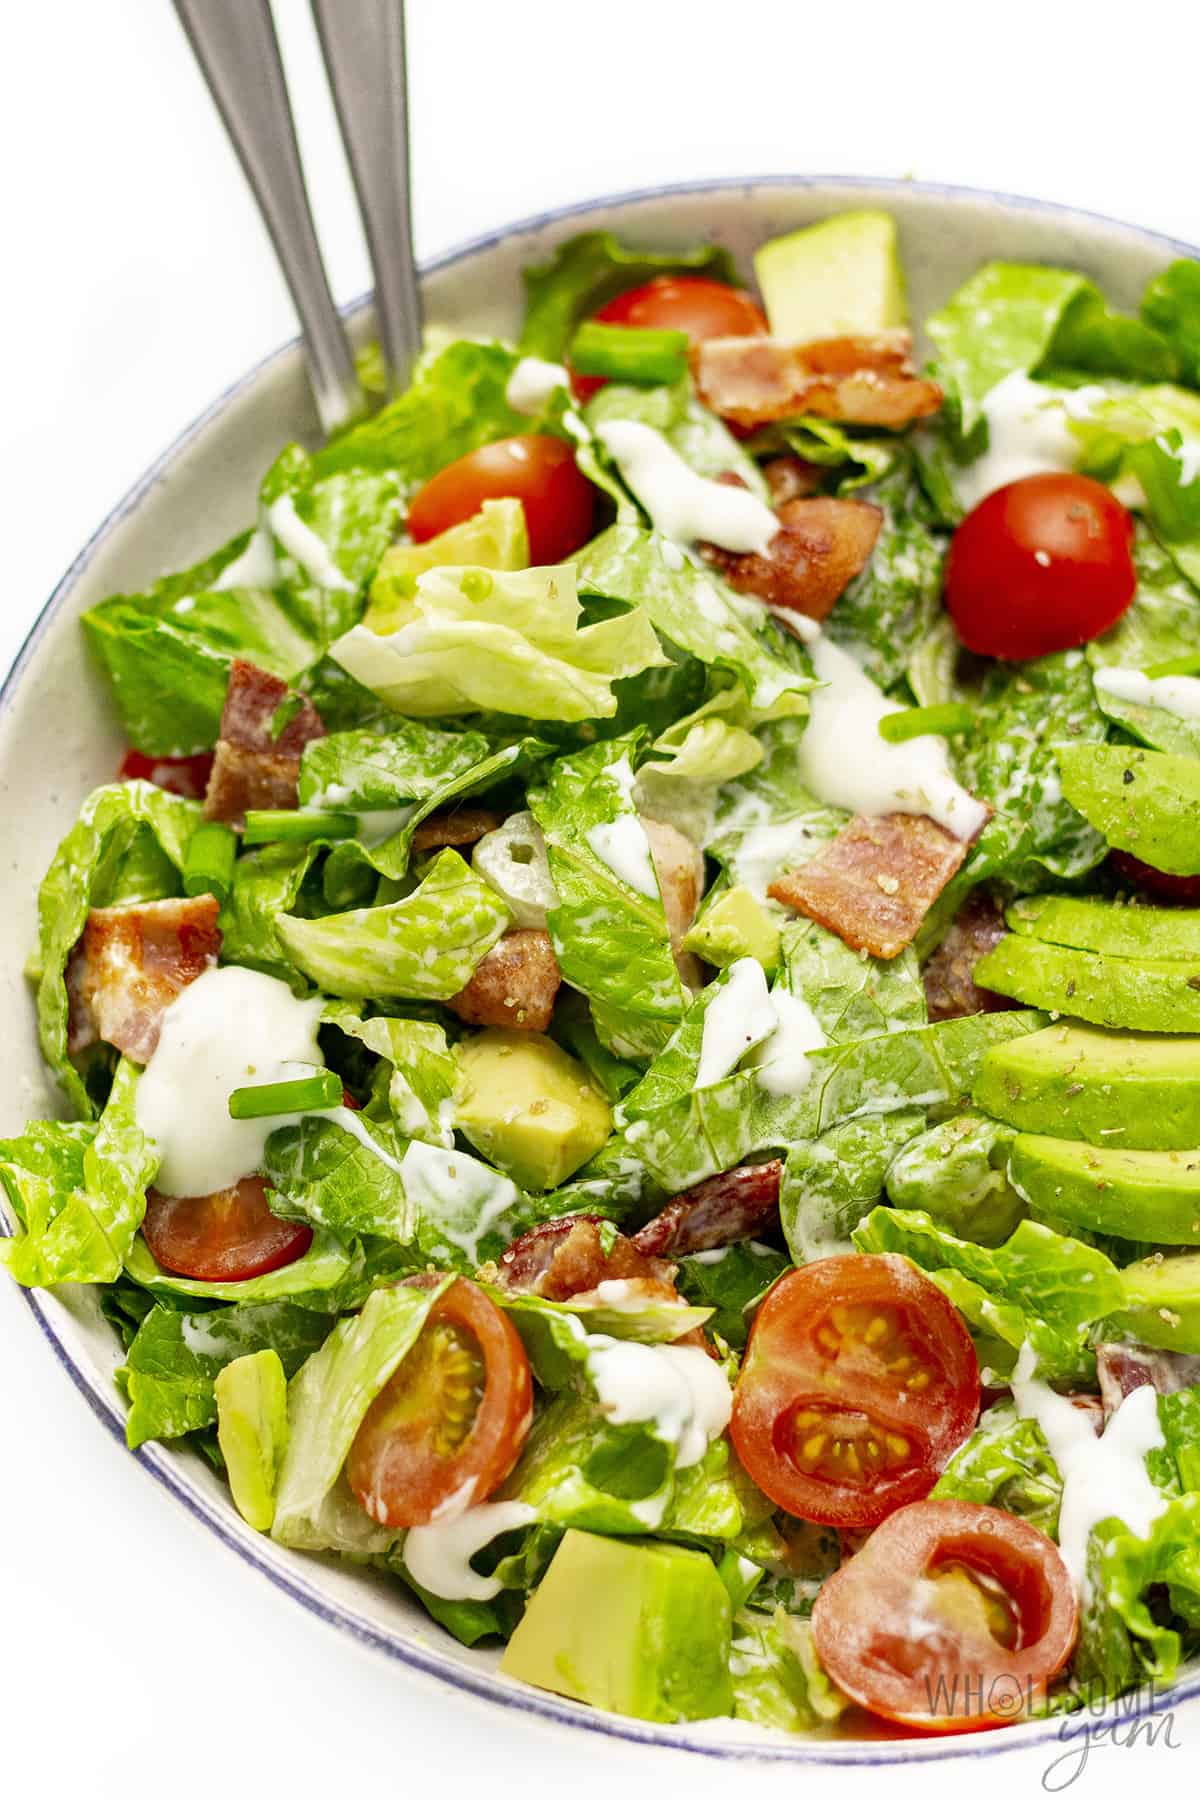 Bacon lettuce tomato salad in a large bowl with serving spoons.